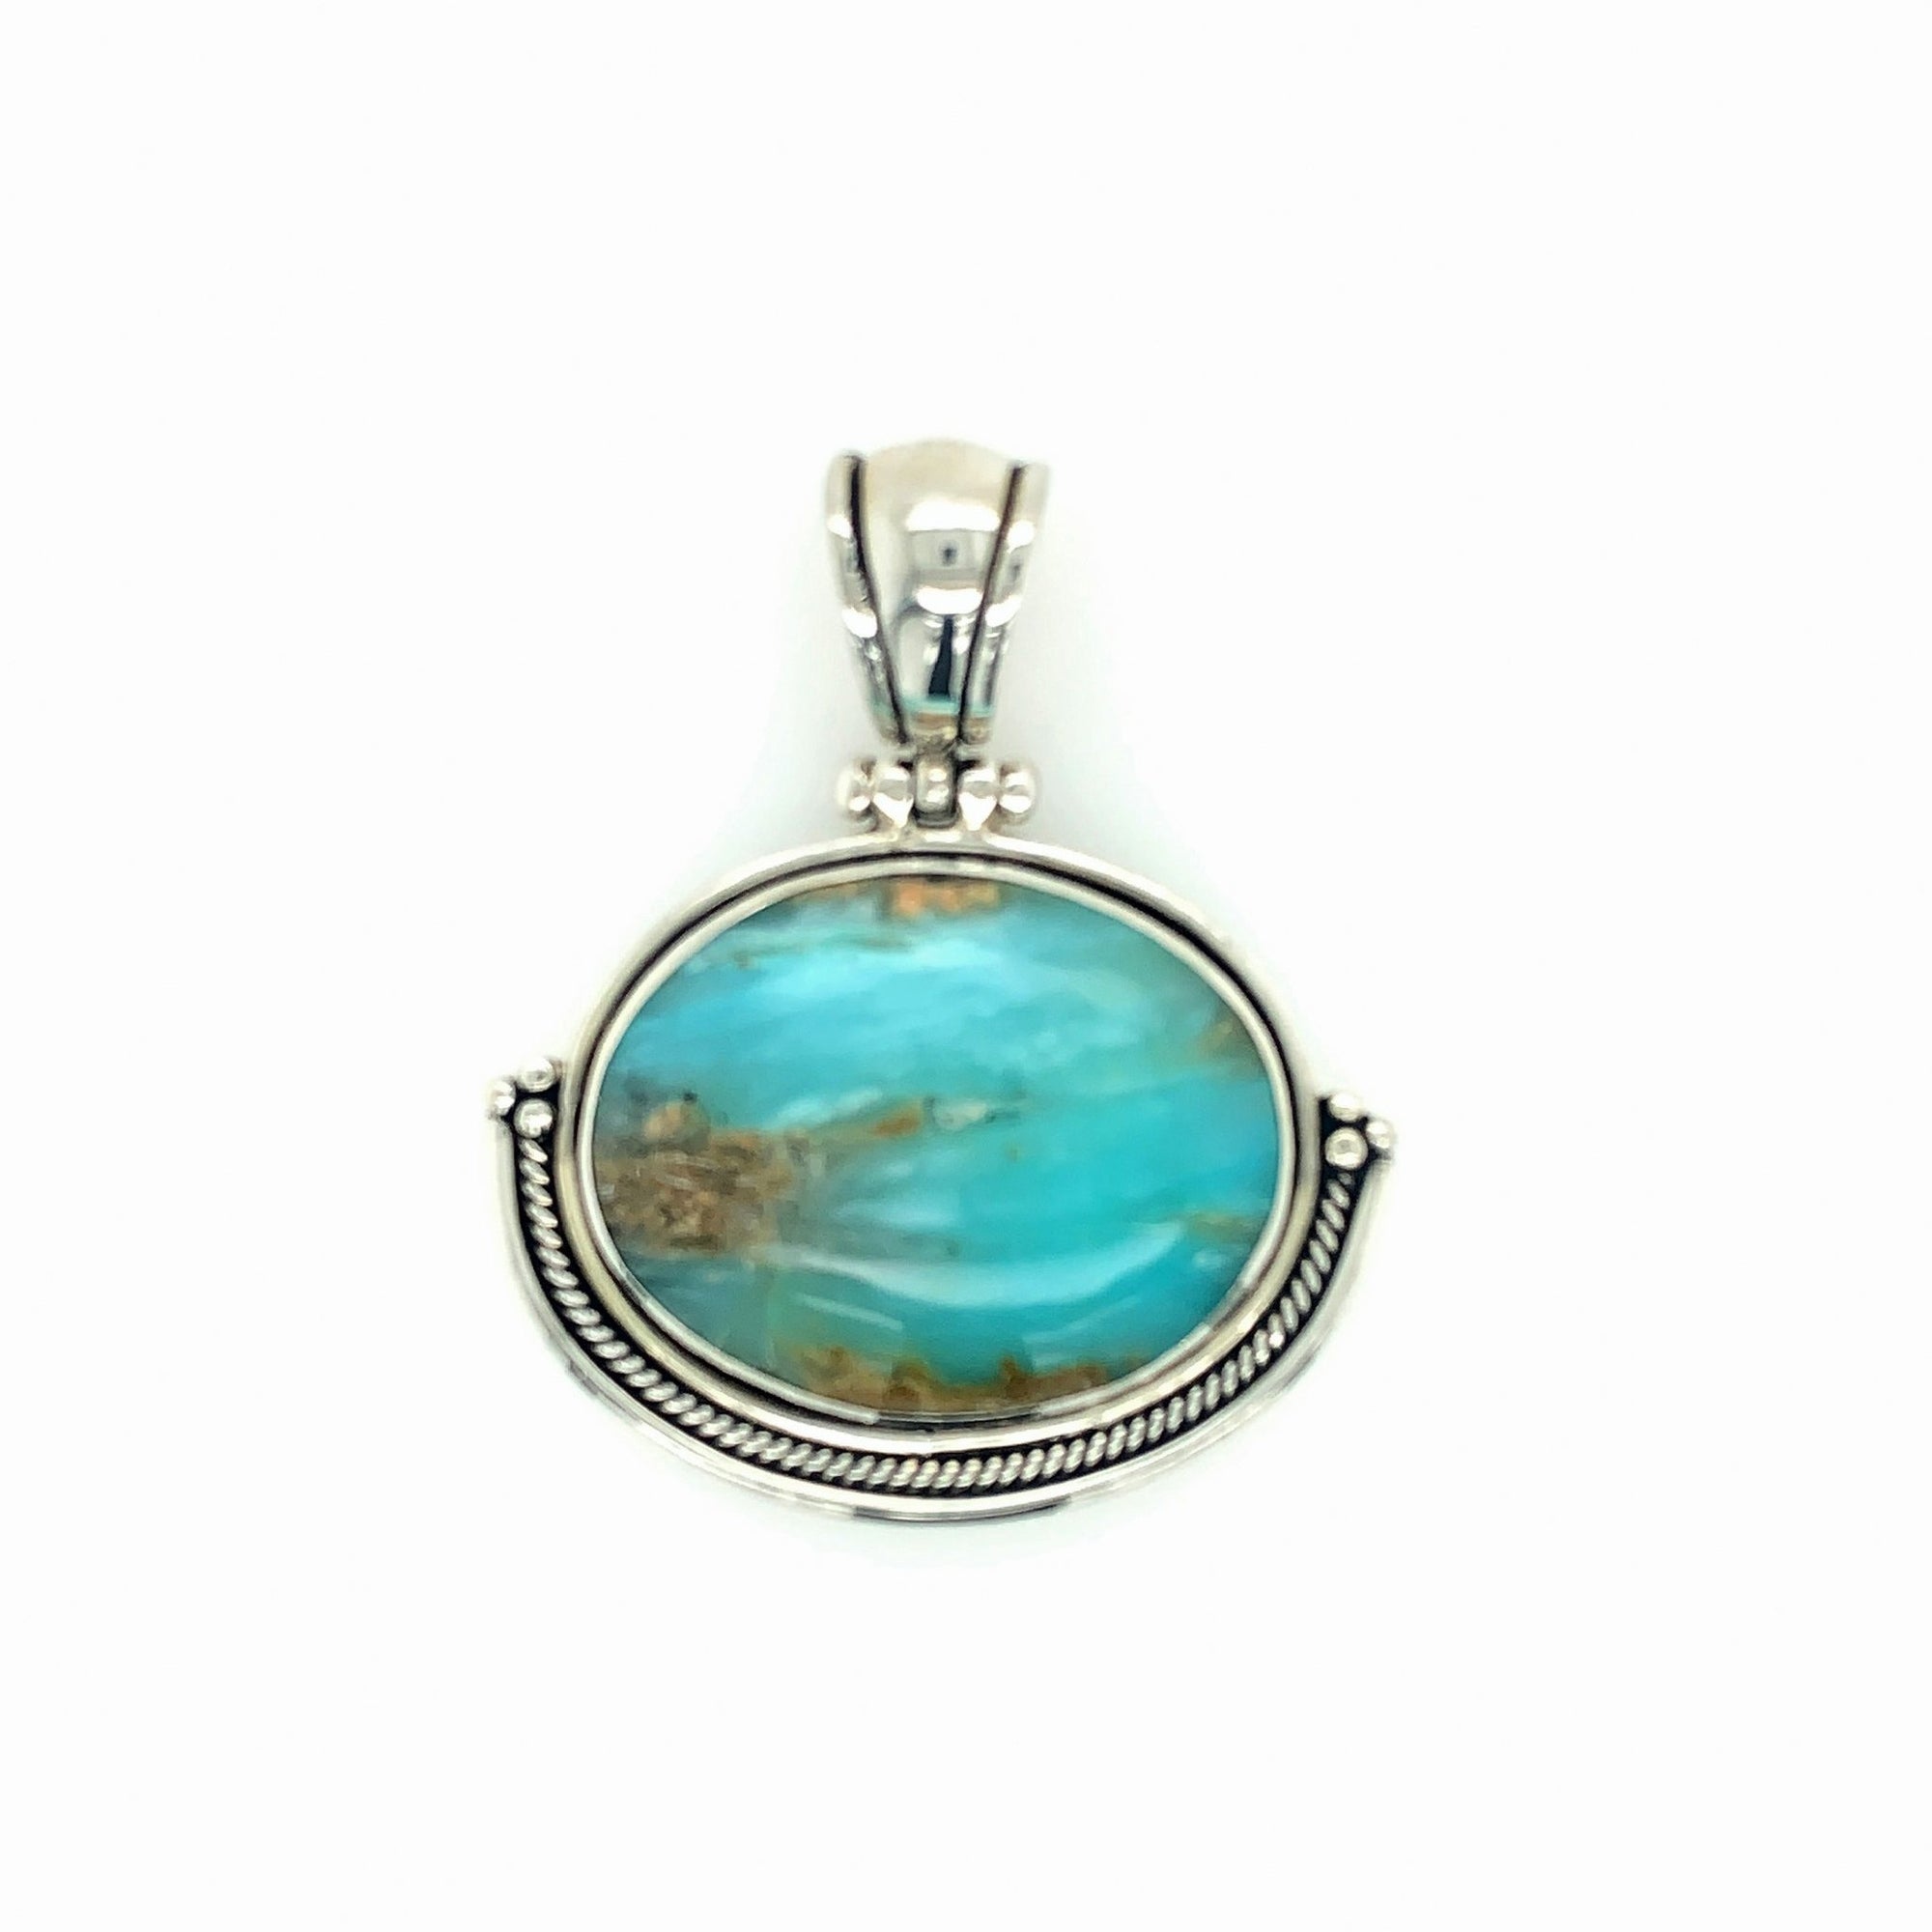 Sterling Silver & Peruvian Blue Opal Oval Pendant with Rope Detail - Qinti - The Peruvian Shop